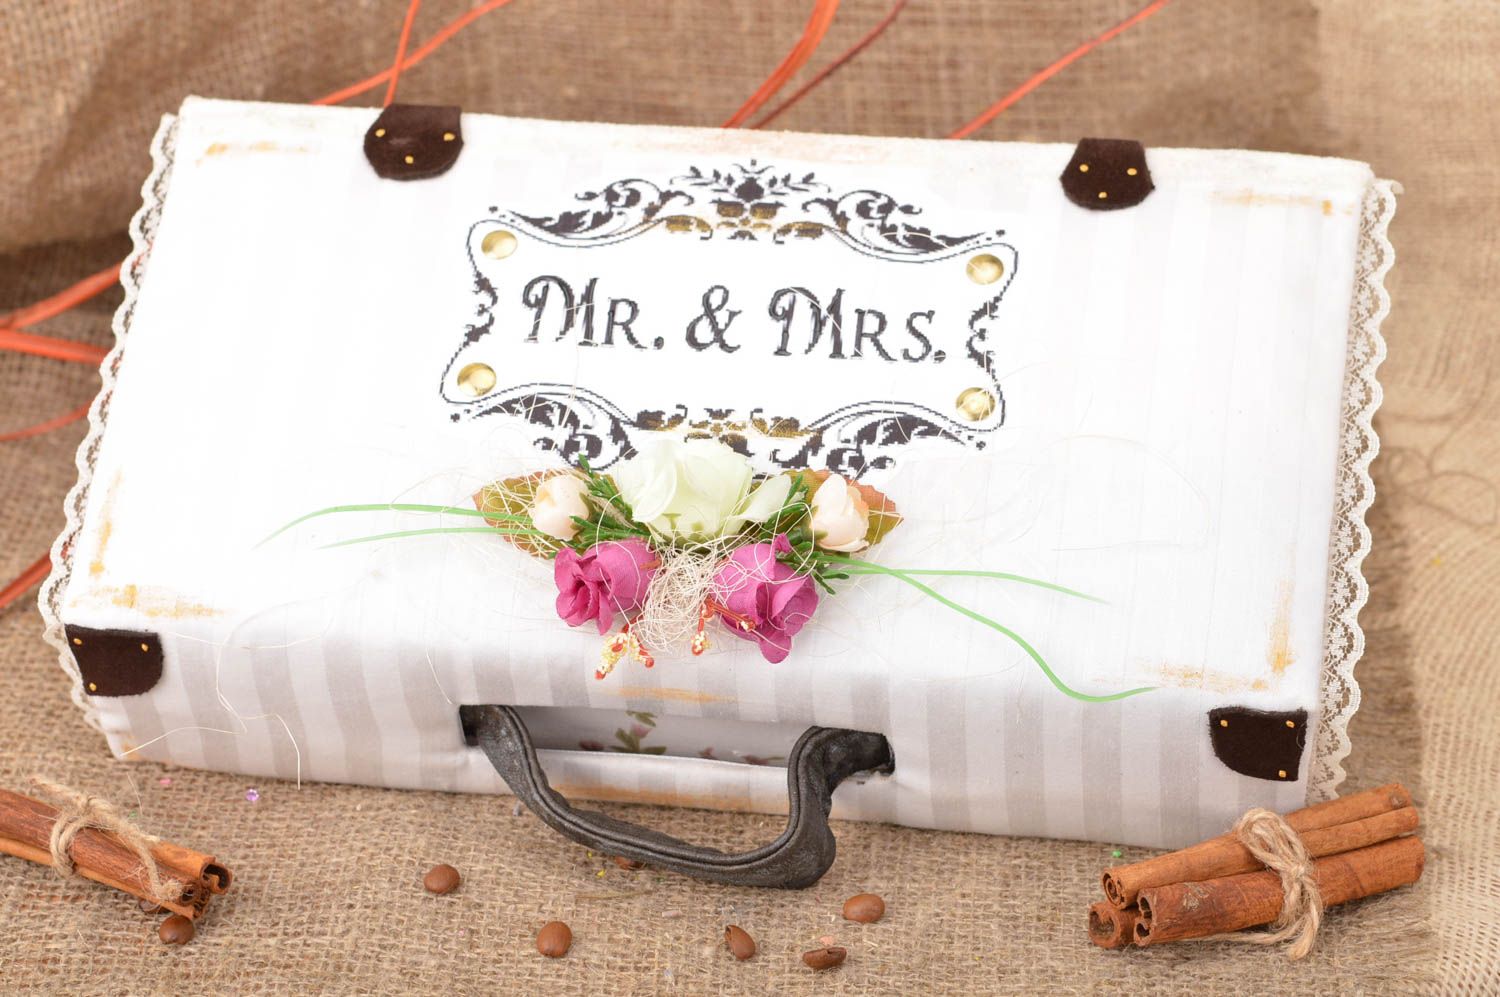 Handmade decorative carton wedding chest box with lace and flowers Mr & Mrs photo 1